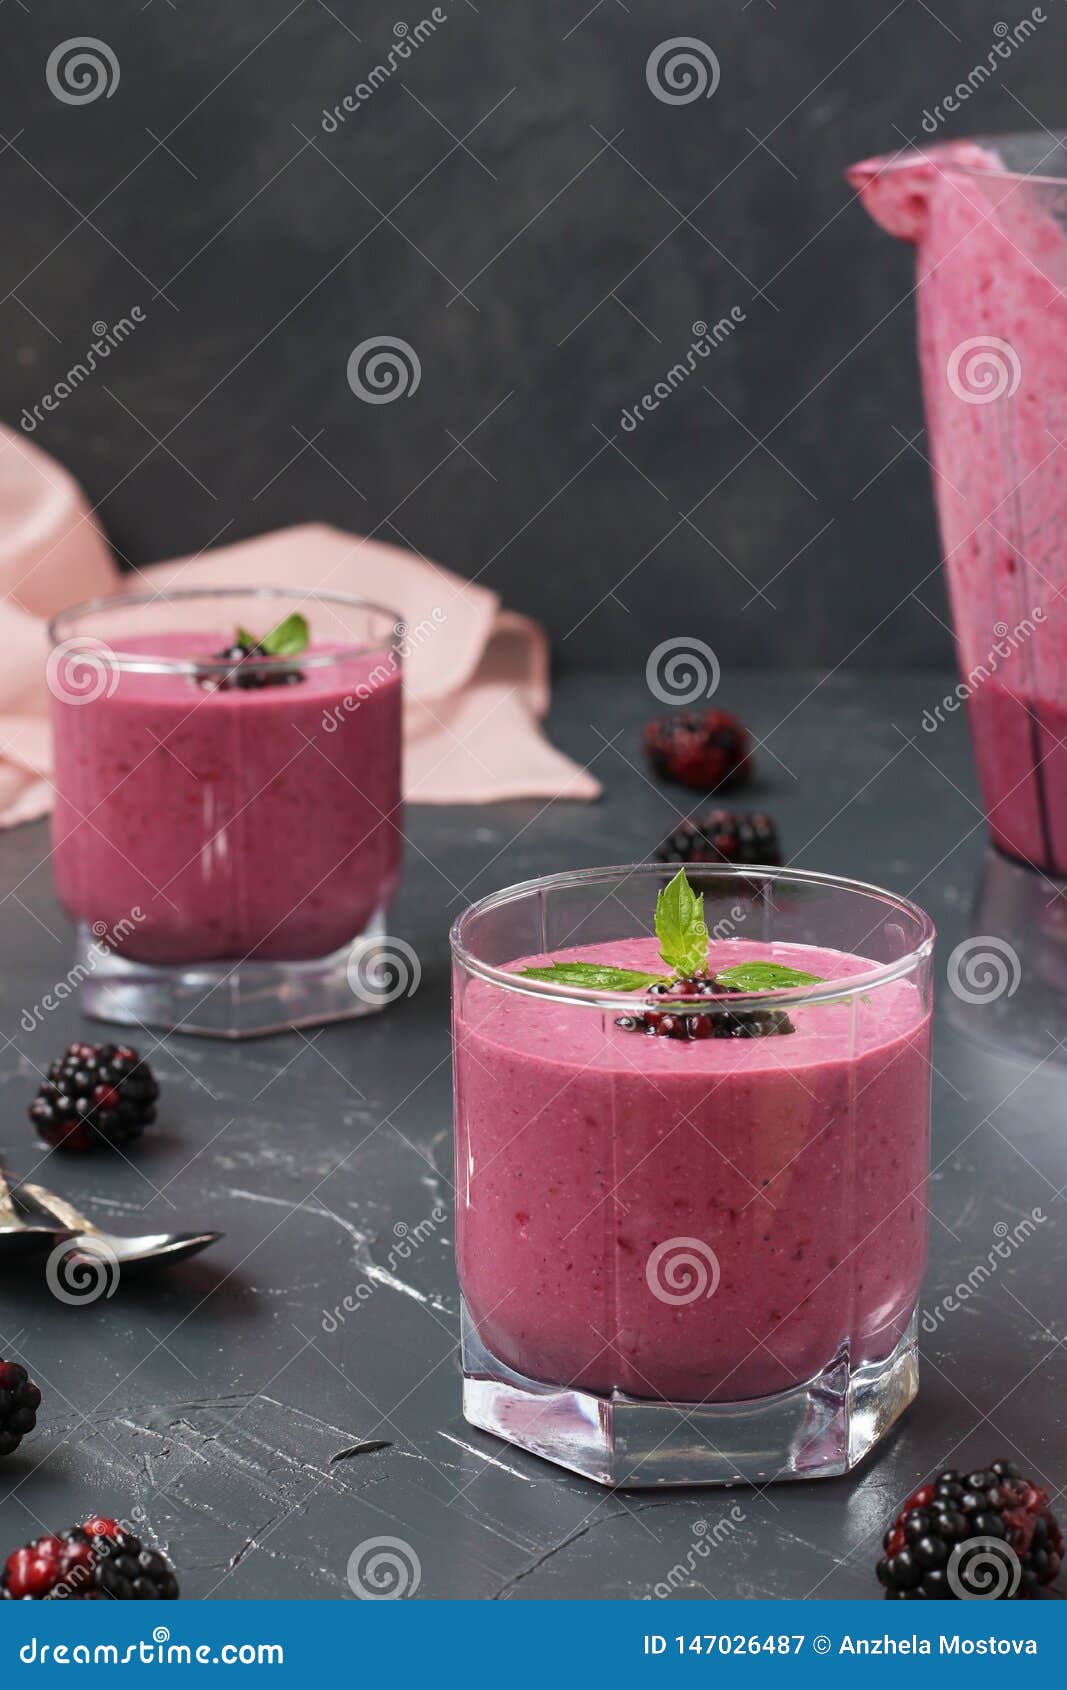 Protein Cocktail With Cottage Cheese And Blackberries Is Located